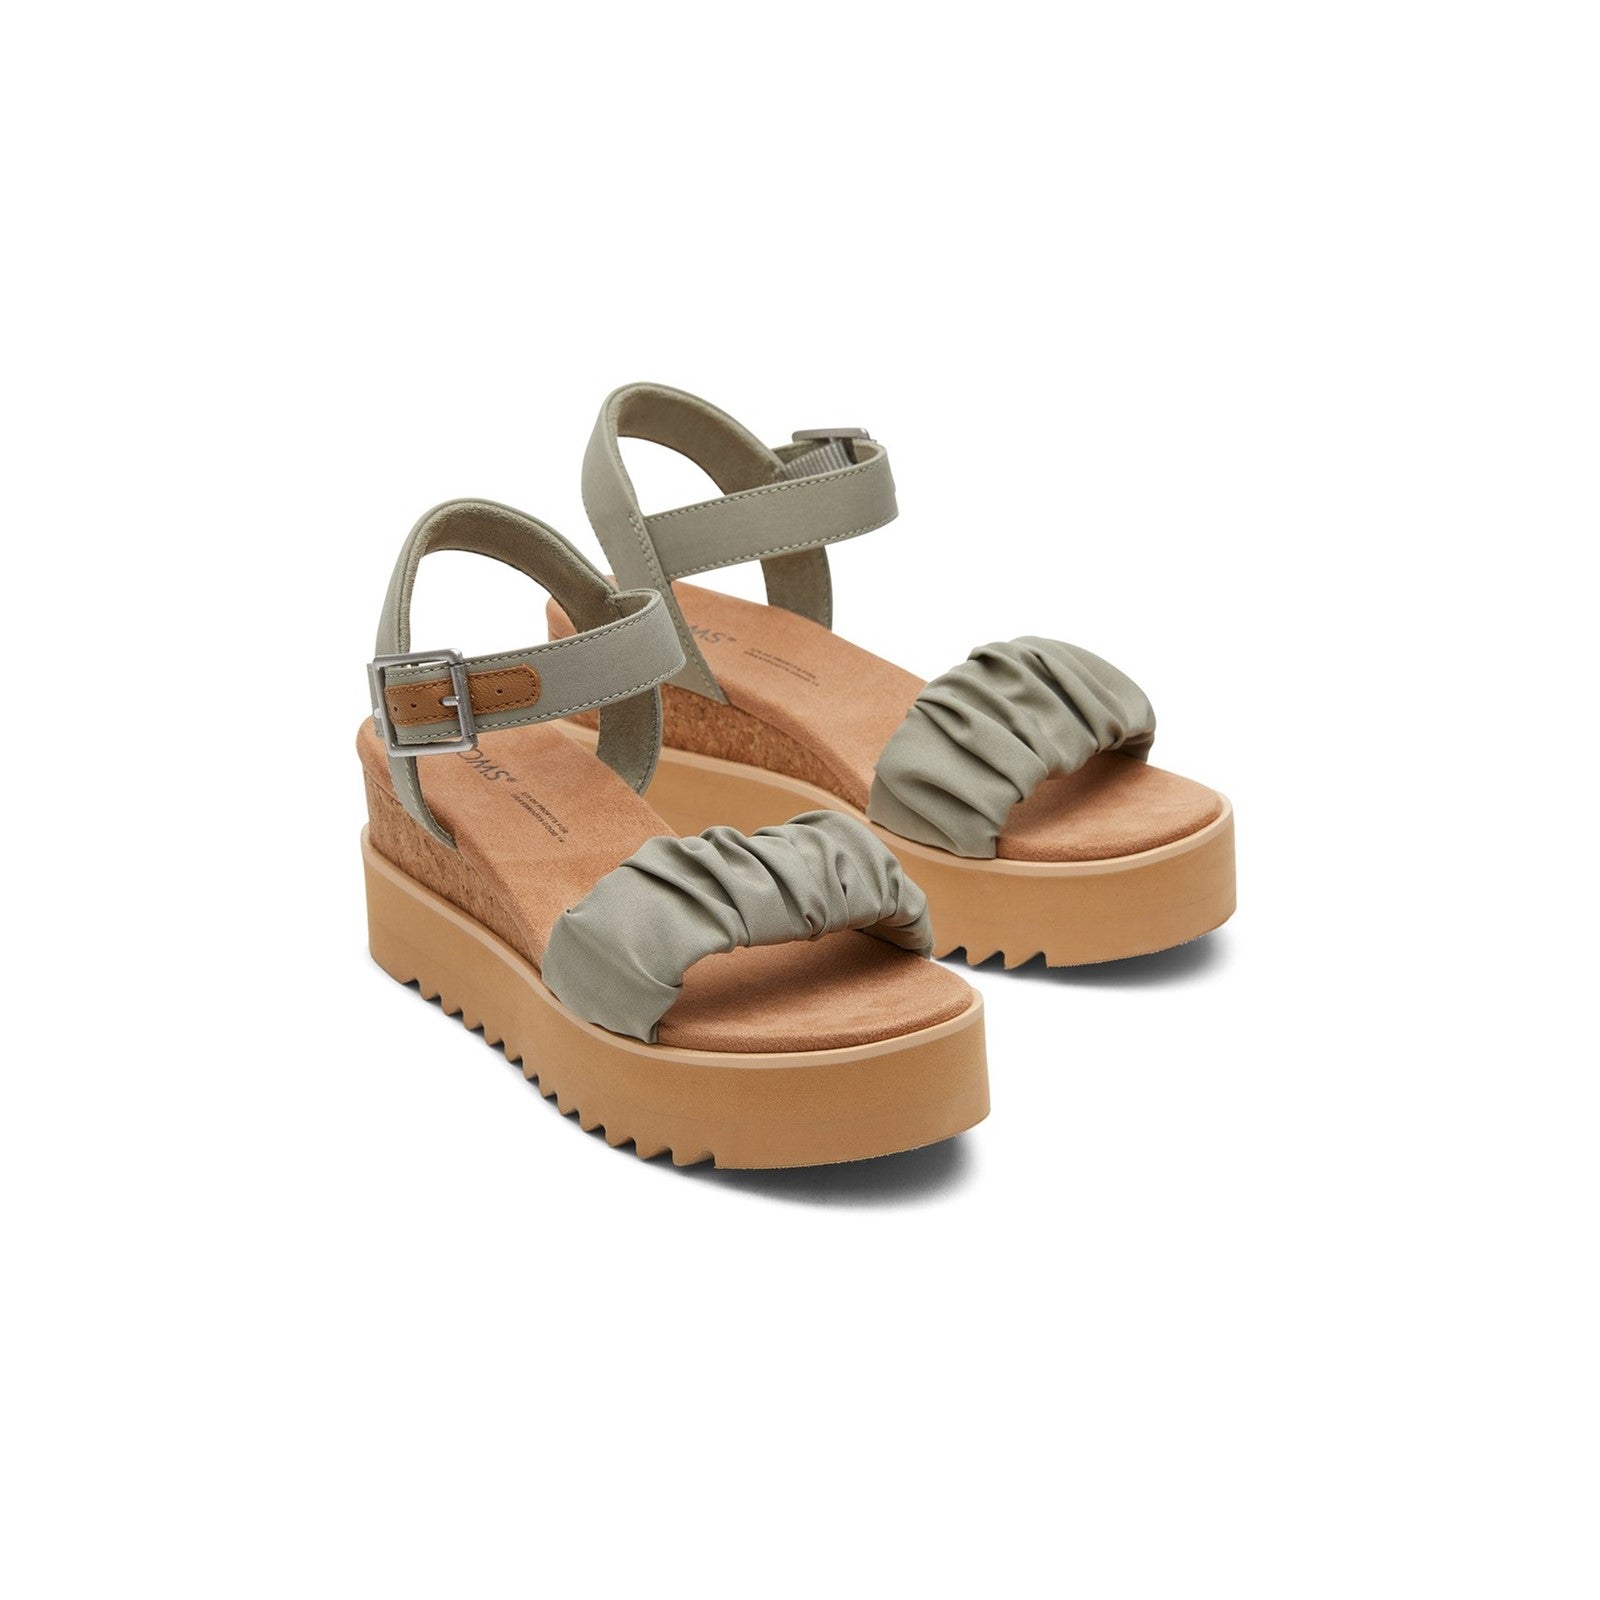 Toms Diana Wedge Sandals